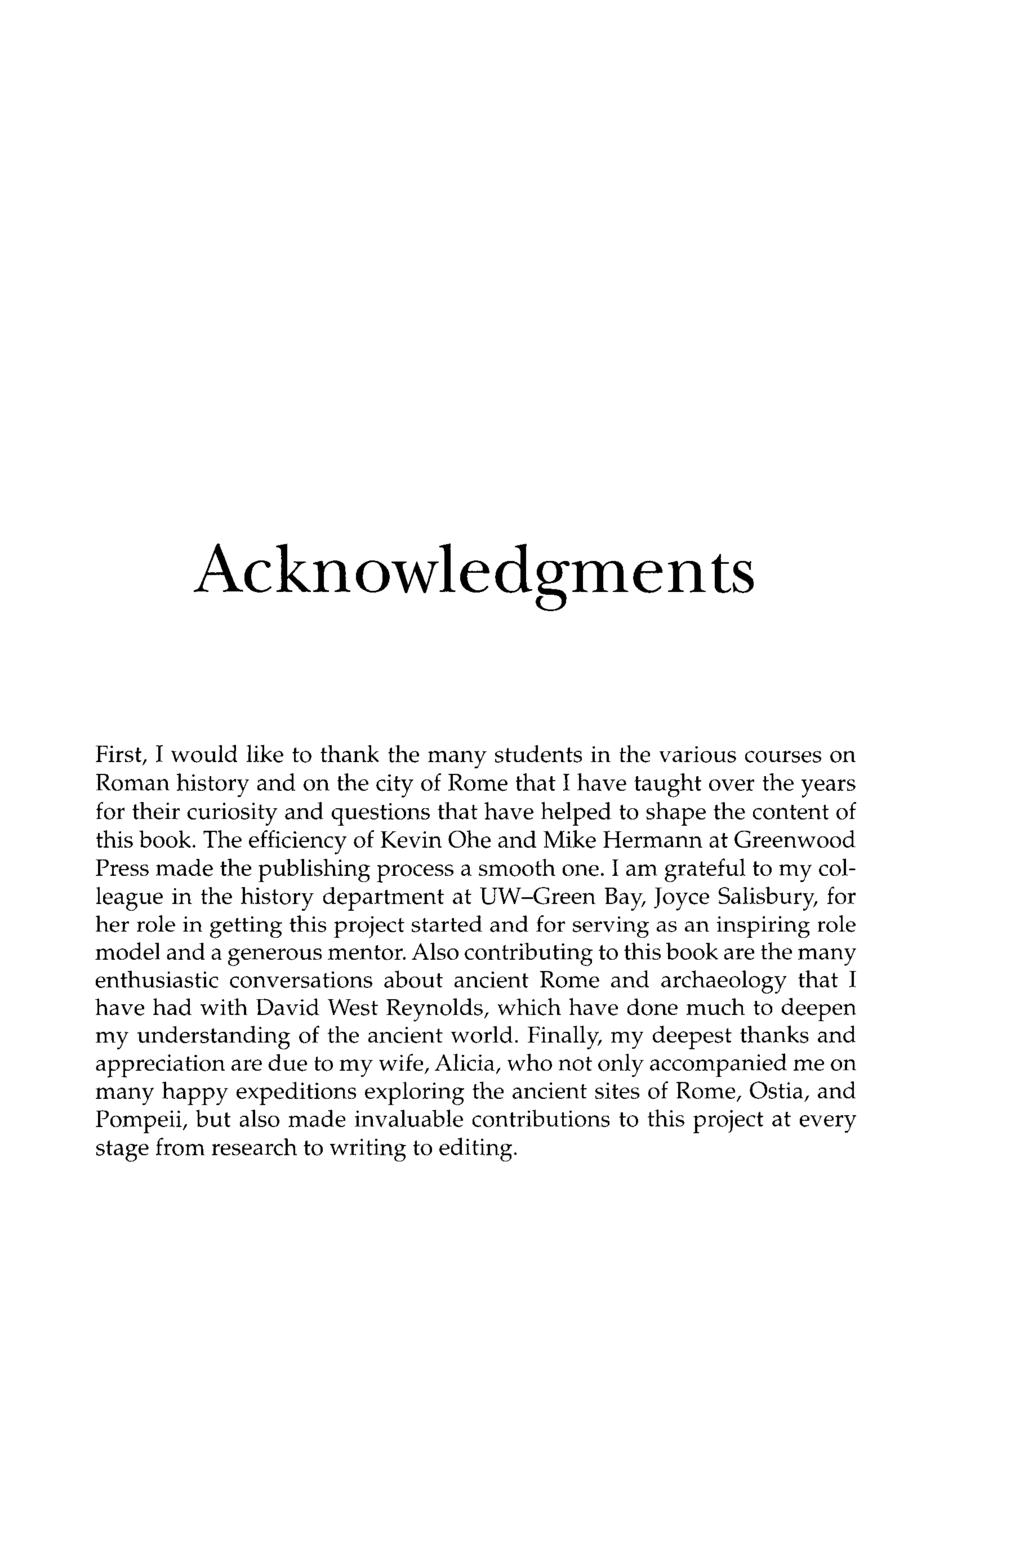 Acknowledgments First, I would like to thank the many students in the various courses on Roman history and on the city of Rome that I have taught over the years for their curiosity and questions that